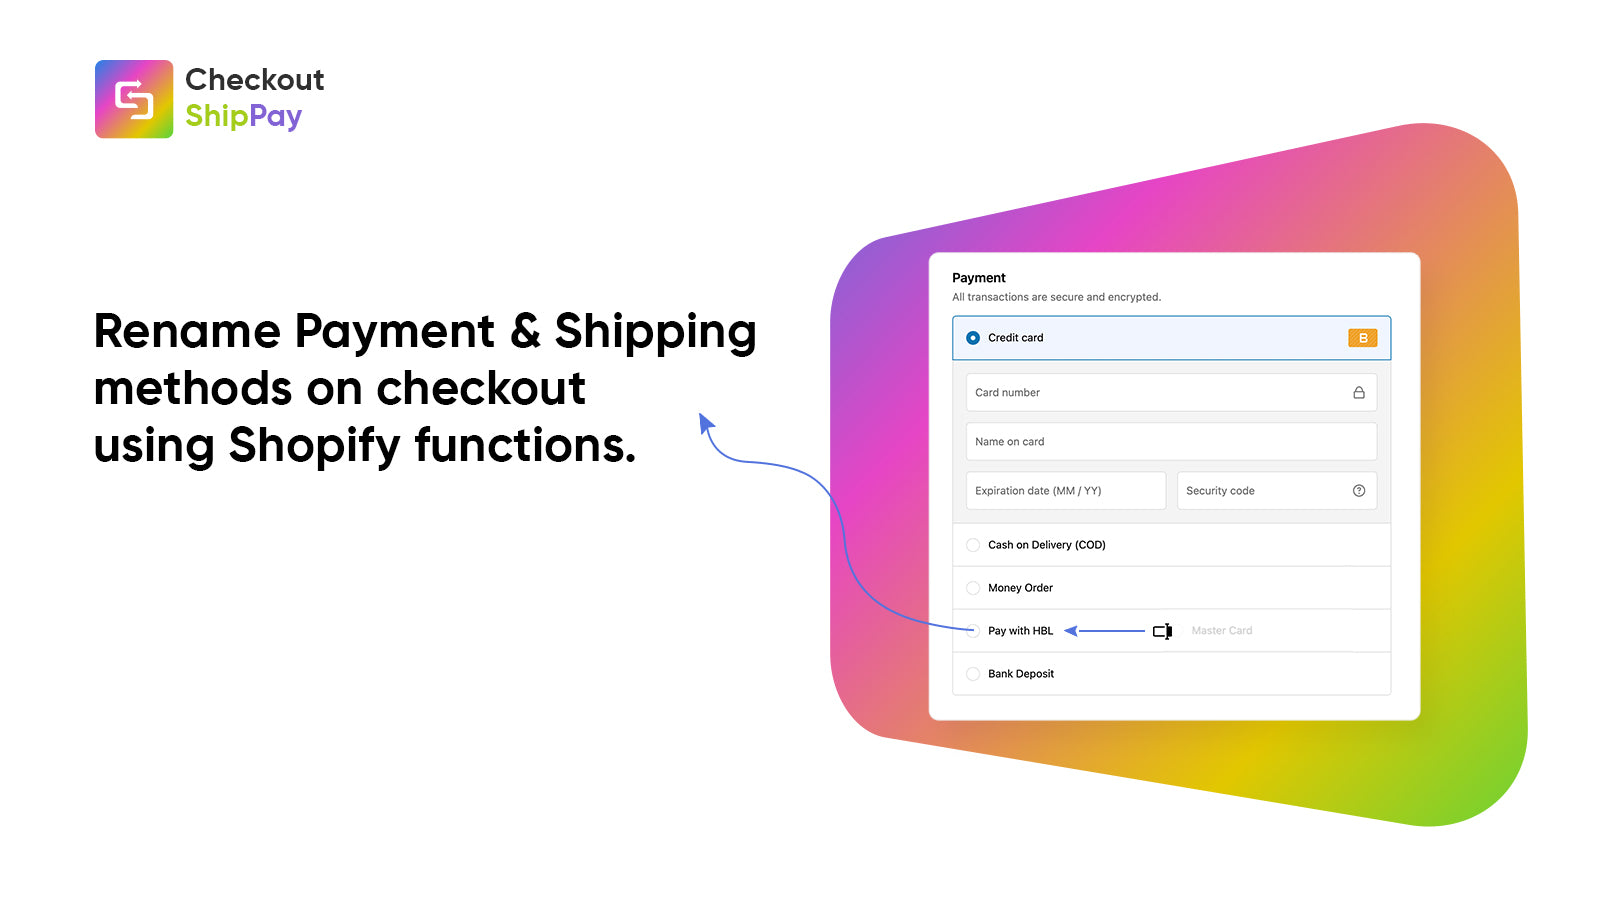 Easiest & Most Effective Checkout Customizations: Checkout ShipPay